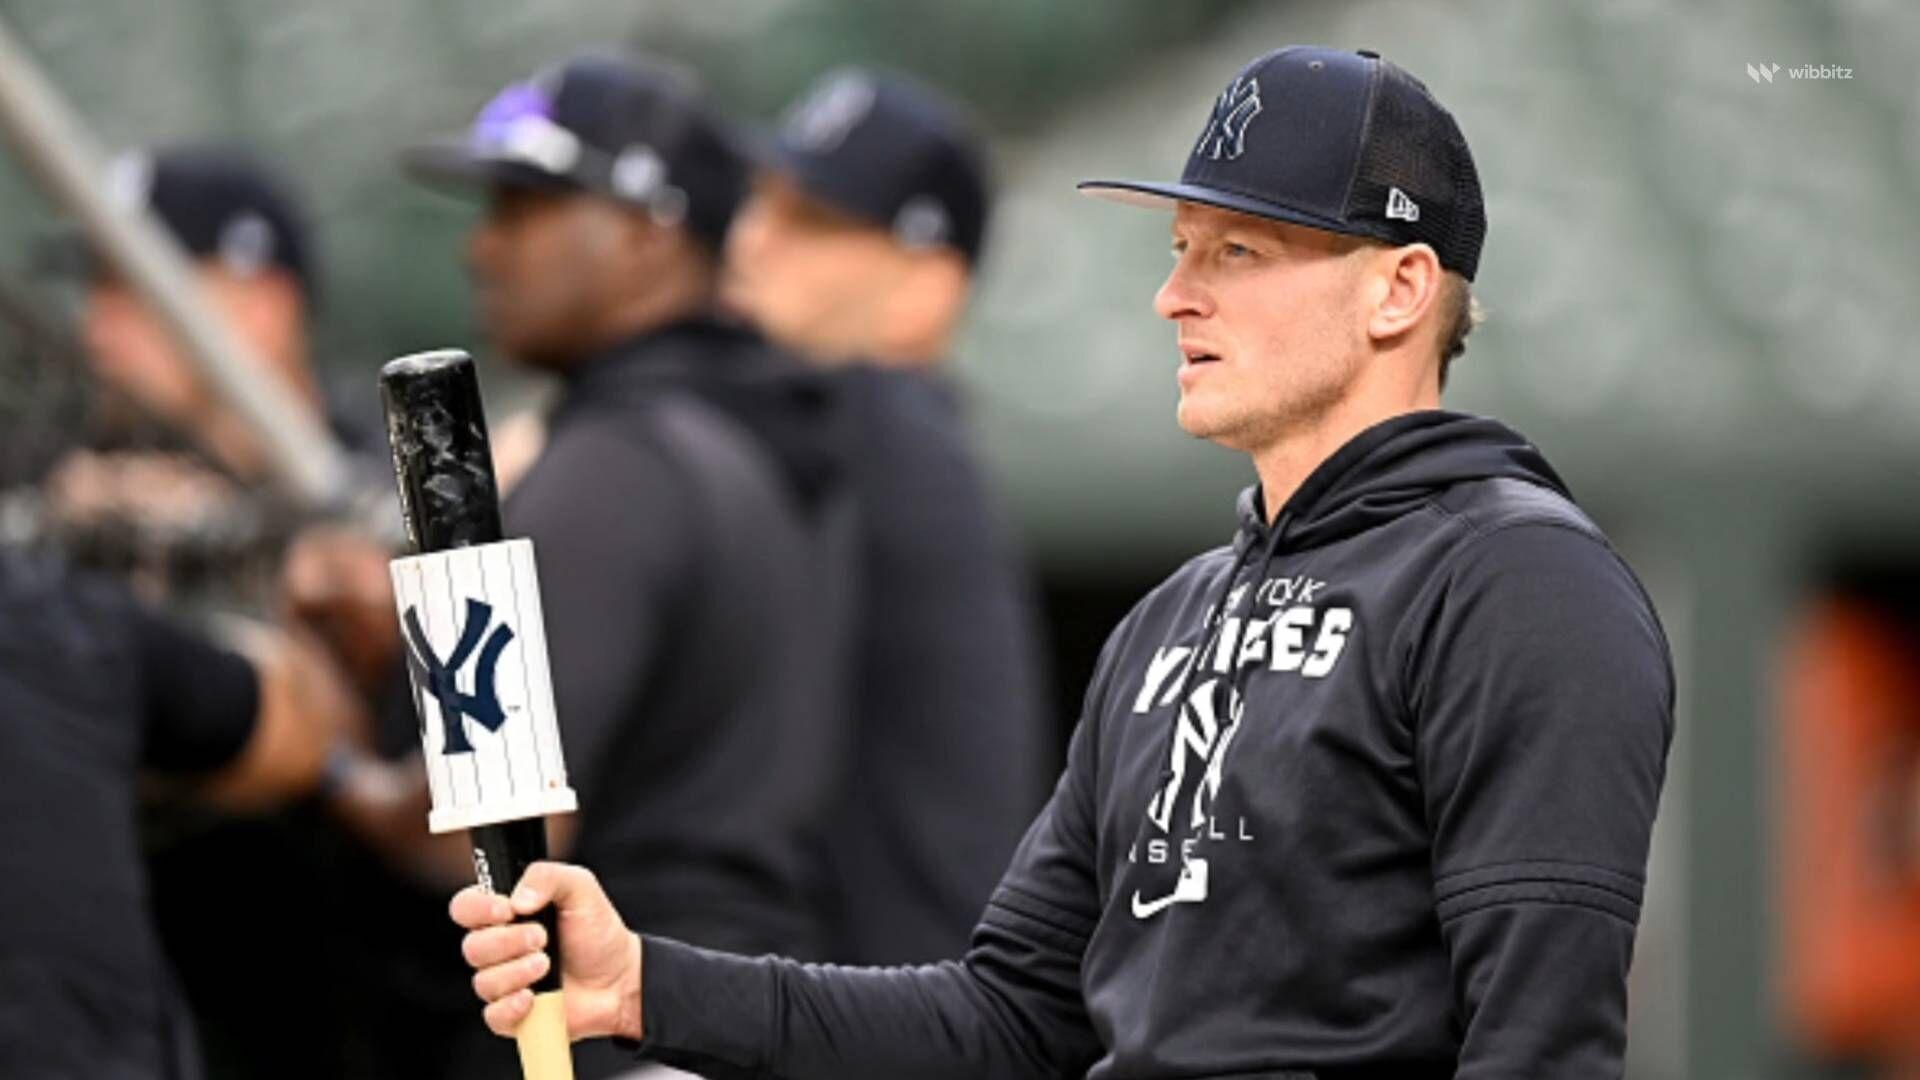 MLB suspends Yankees Josh Donaldson for 'inappropriate comments